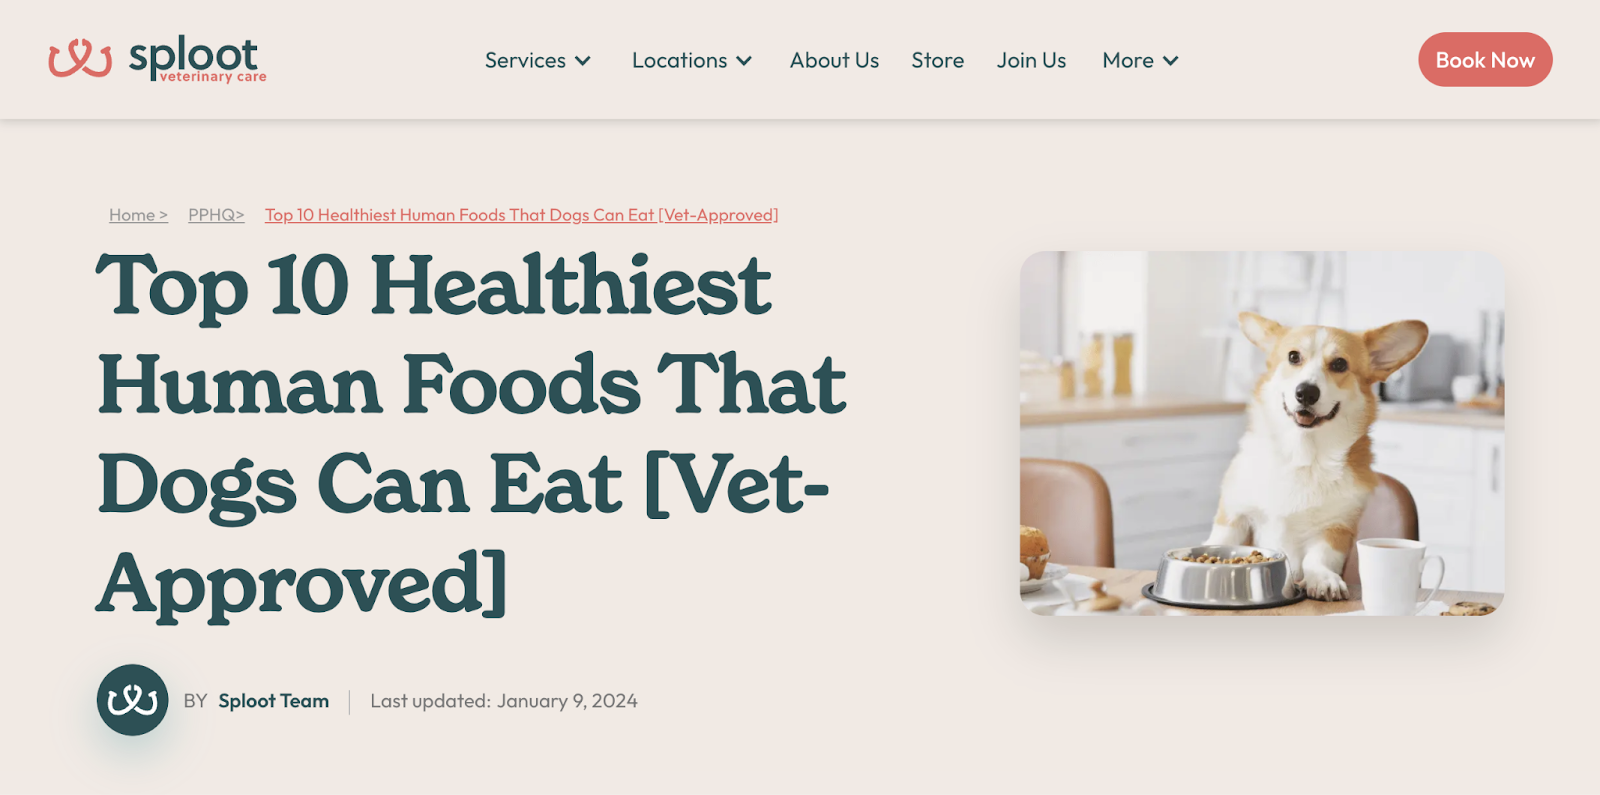 blog hero section about top 10 healthliest human foods that dogs can eat (vet-approved)